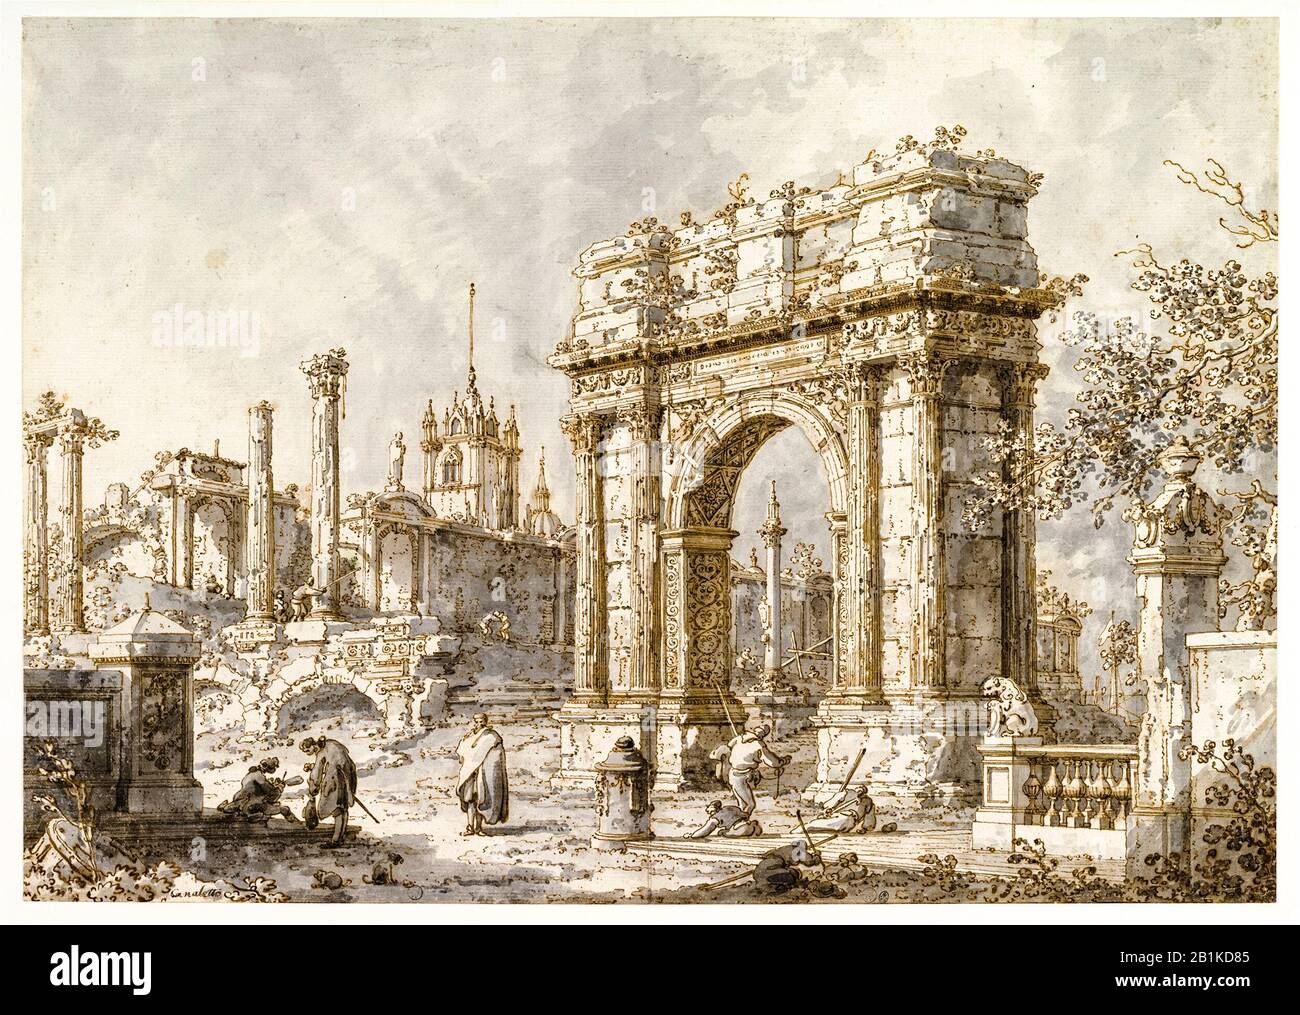 Canaletto, drawing, Capriccio with a Roman Triumphal Arch, 1720-1730 Stock Photo